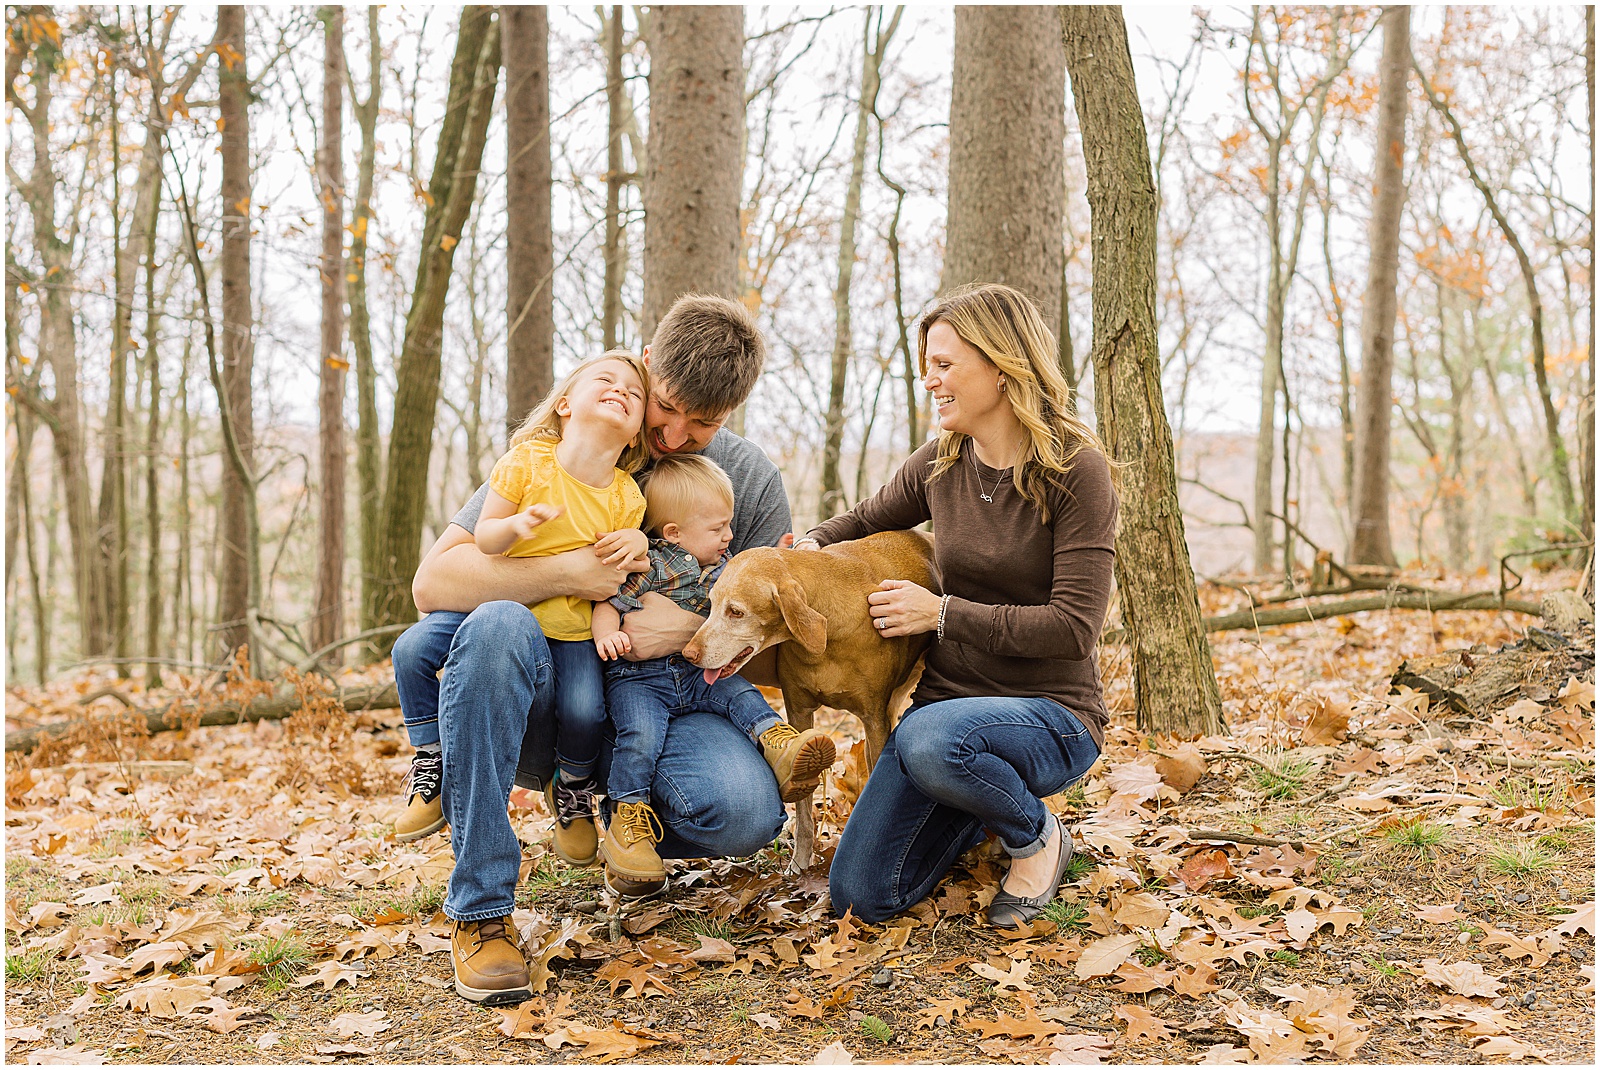 portrait of family posing in forest with leaves by film photographer AGS Photo Art